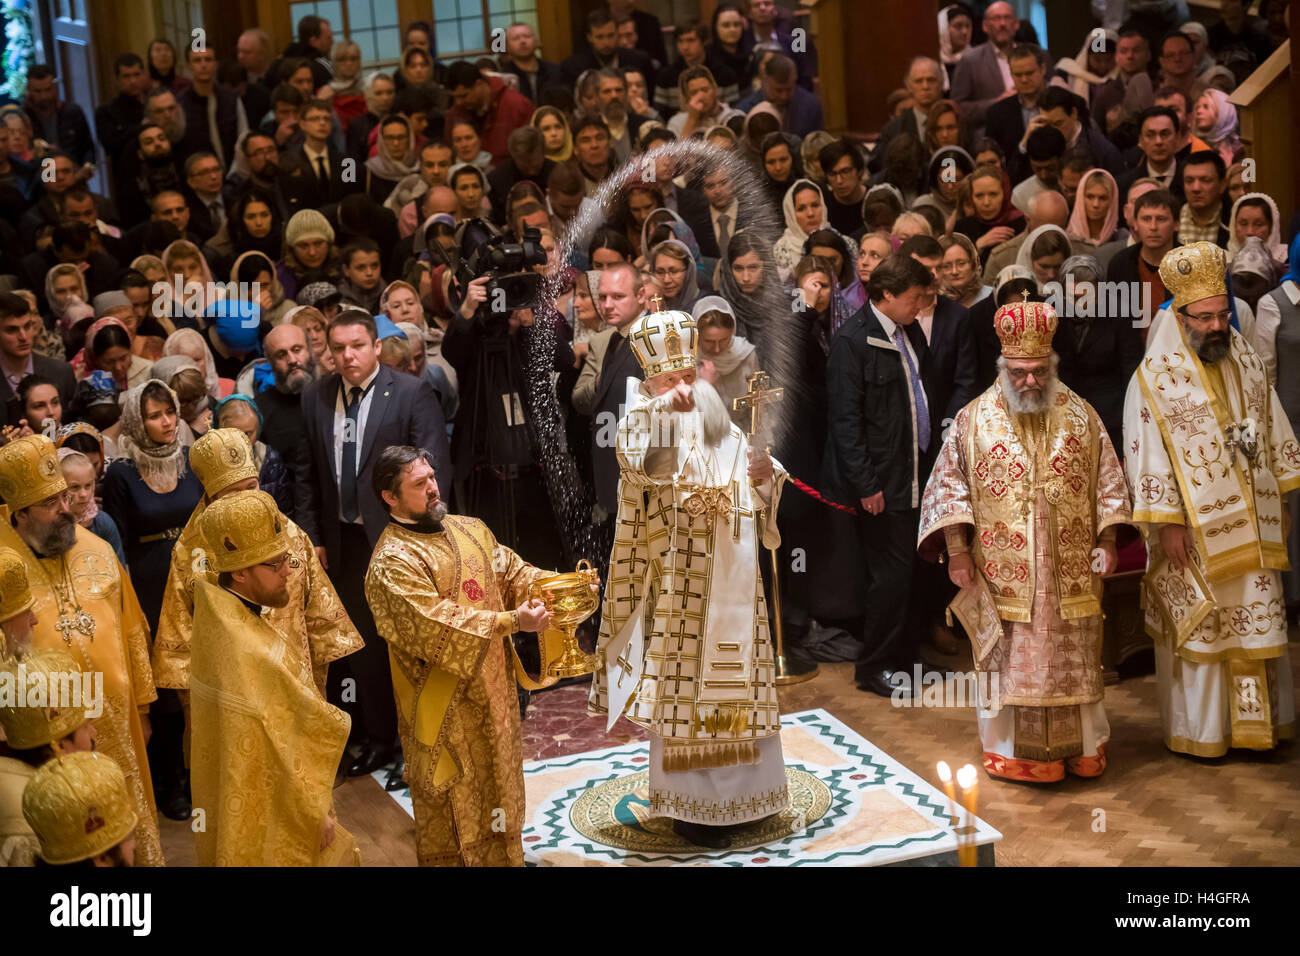 Kensington, London, UK. 16th Oct, 2016.The consecration of the Cathedral of the Dormition and All Saints. Divine Liturgy. Sanctification of the bells and frescoes on the outer wall of the church. This is part of The pastoral visit of His Holiness Patriarch Kirill of Moscow and All Russia to the United Kingdom.Pic Shows His Holiness Patriarch Kirill sanctifying the clergy and the parishioners Credit:  PAUL GROVER/Alamy Live News Stock Photo